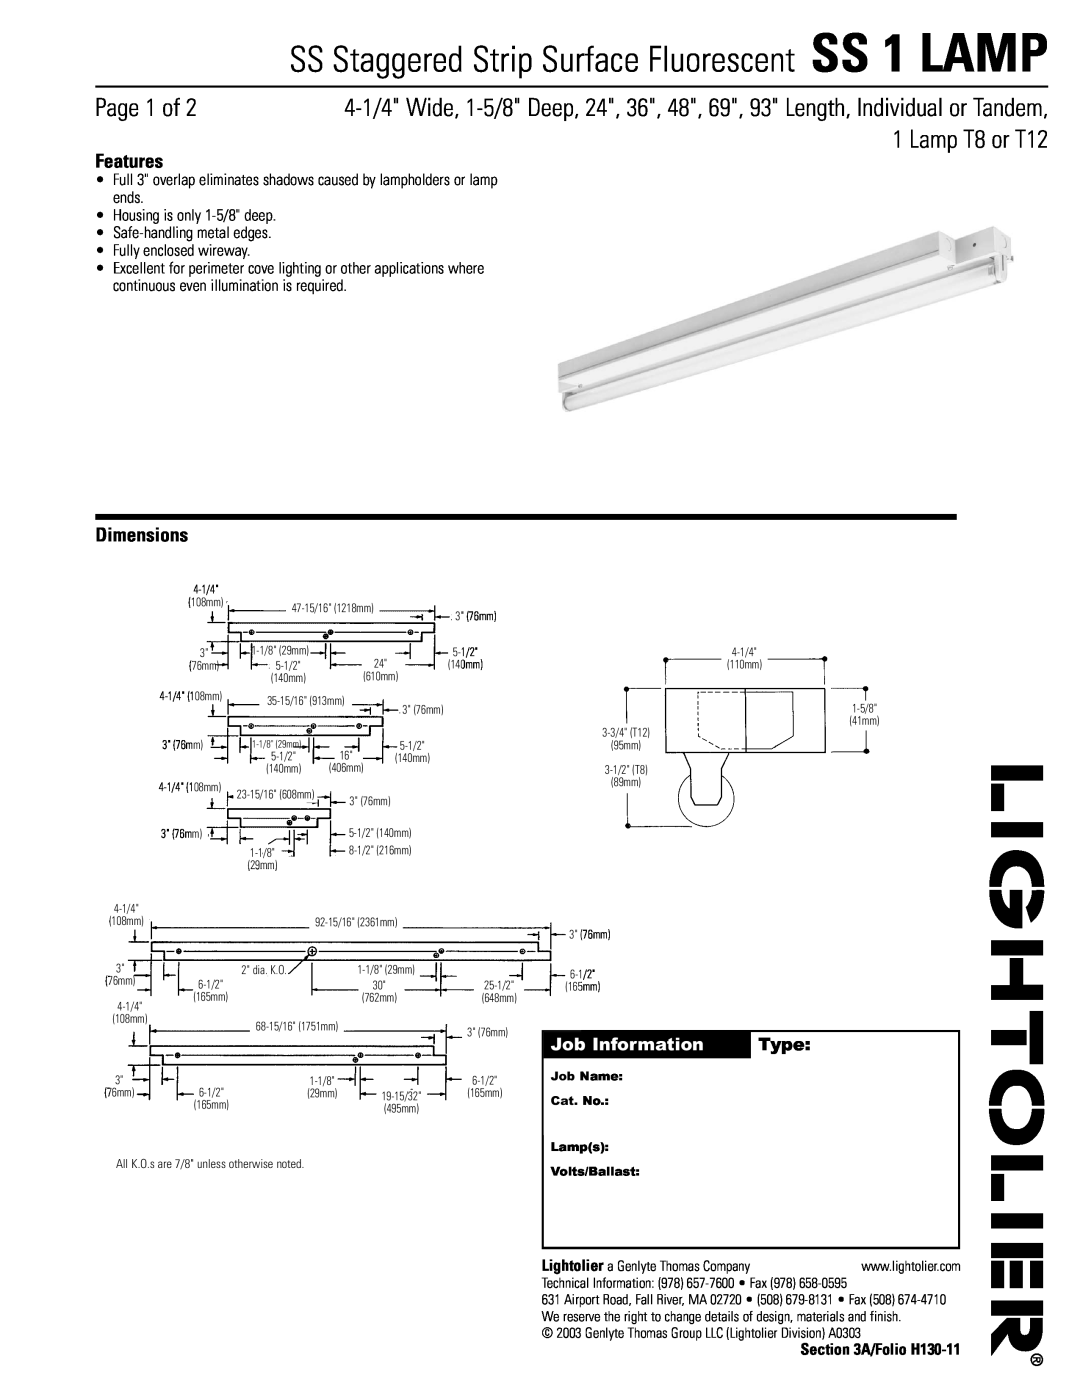 Lightolier SS 1 LAMP dimensions Page 1 of, Lamp T8 or T12, Features, Dimensions, Job Information, Type, A/Folio H130-11 